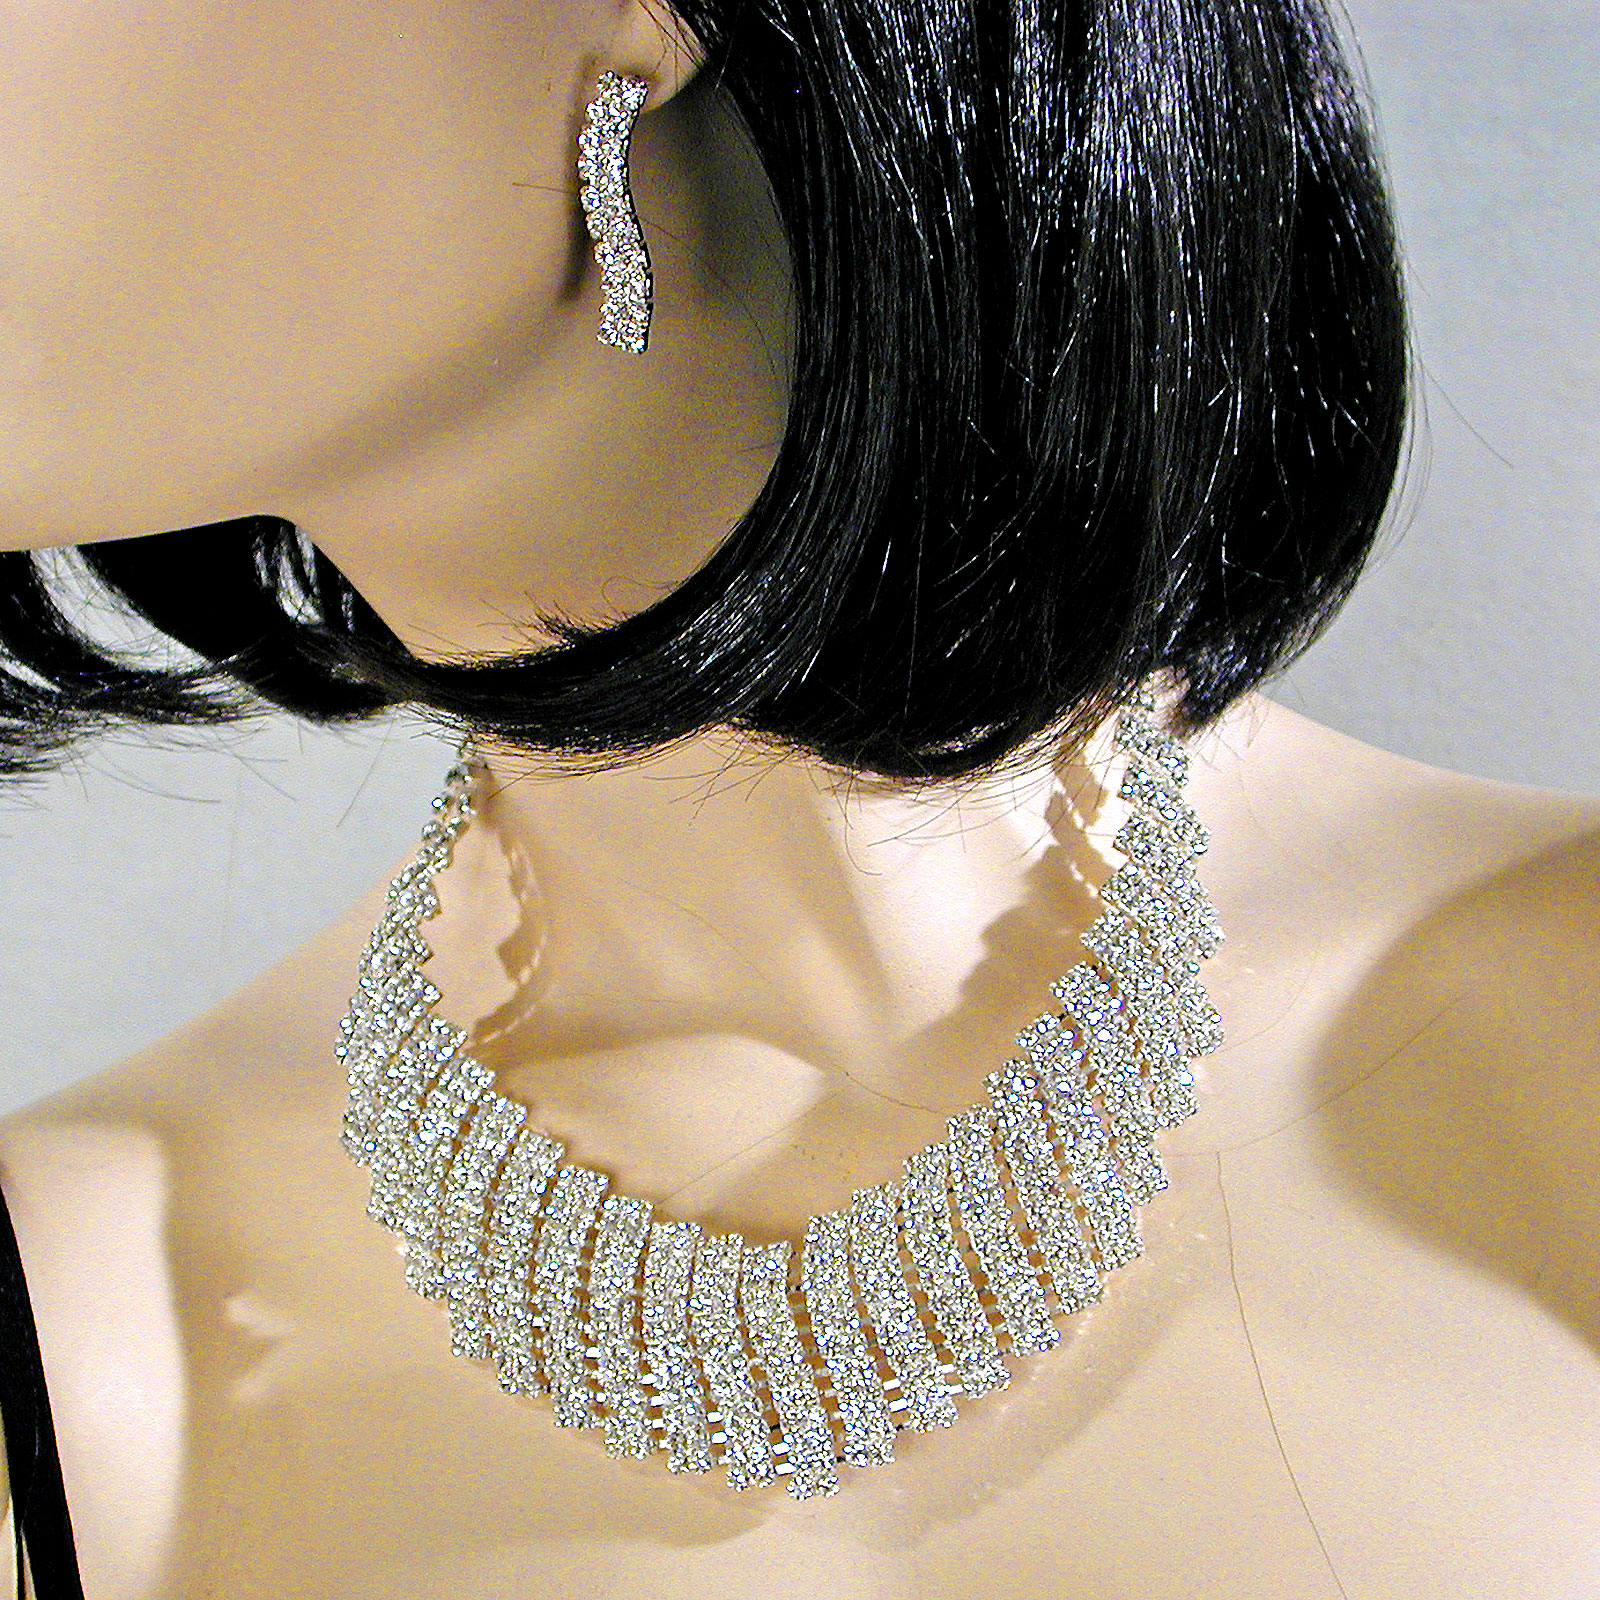 Brilliant Silver and Clear Crystal Rhinestone Necklace Set, a fashion accessorie - Evening Elegance